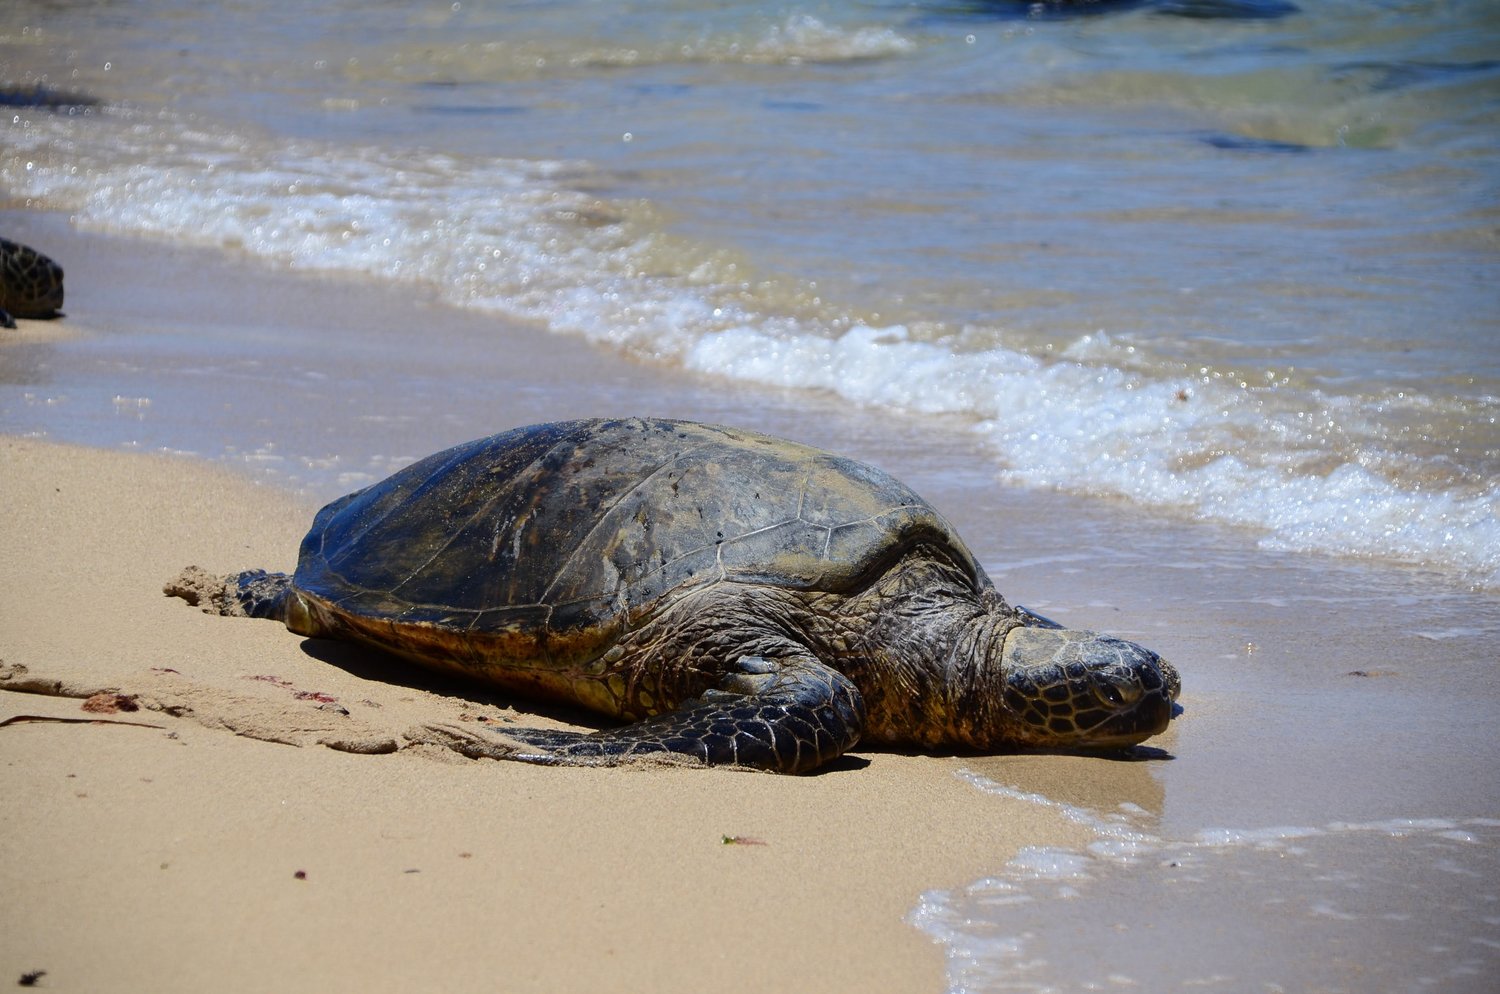 A Hawaiian green sea turtle, pictured here basking on the beach, can suffer from becoming entangled in plastics, or by consuming them. As a threatened species, the turtles are protected in Hawaii, and people can face heavy fines for coming into close contact with them.